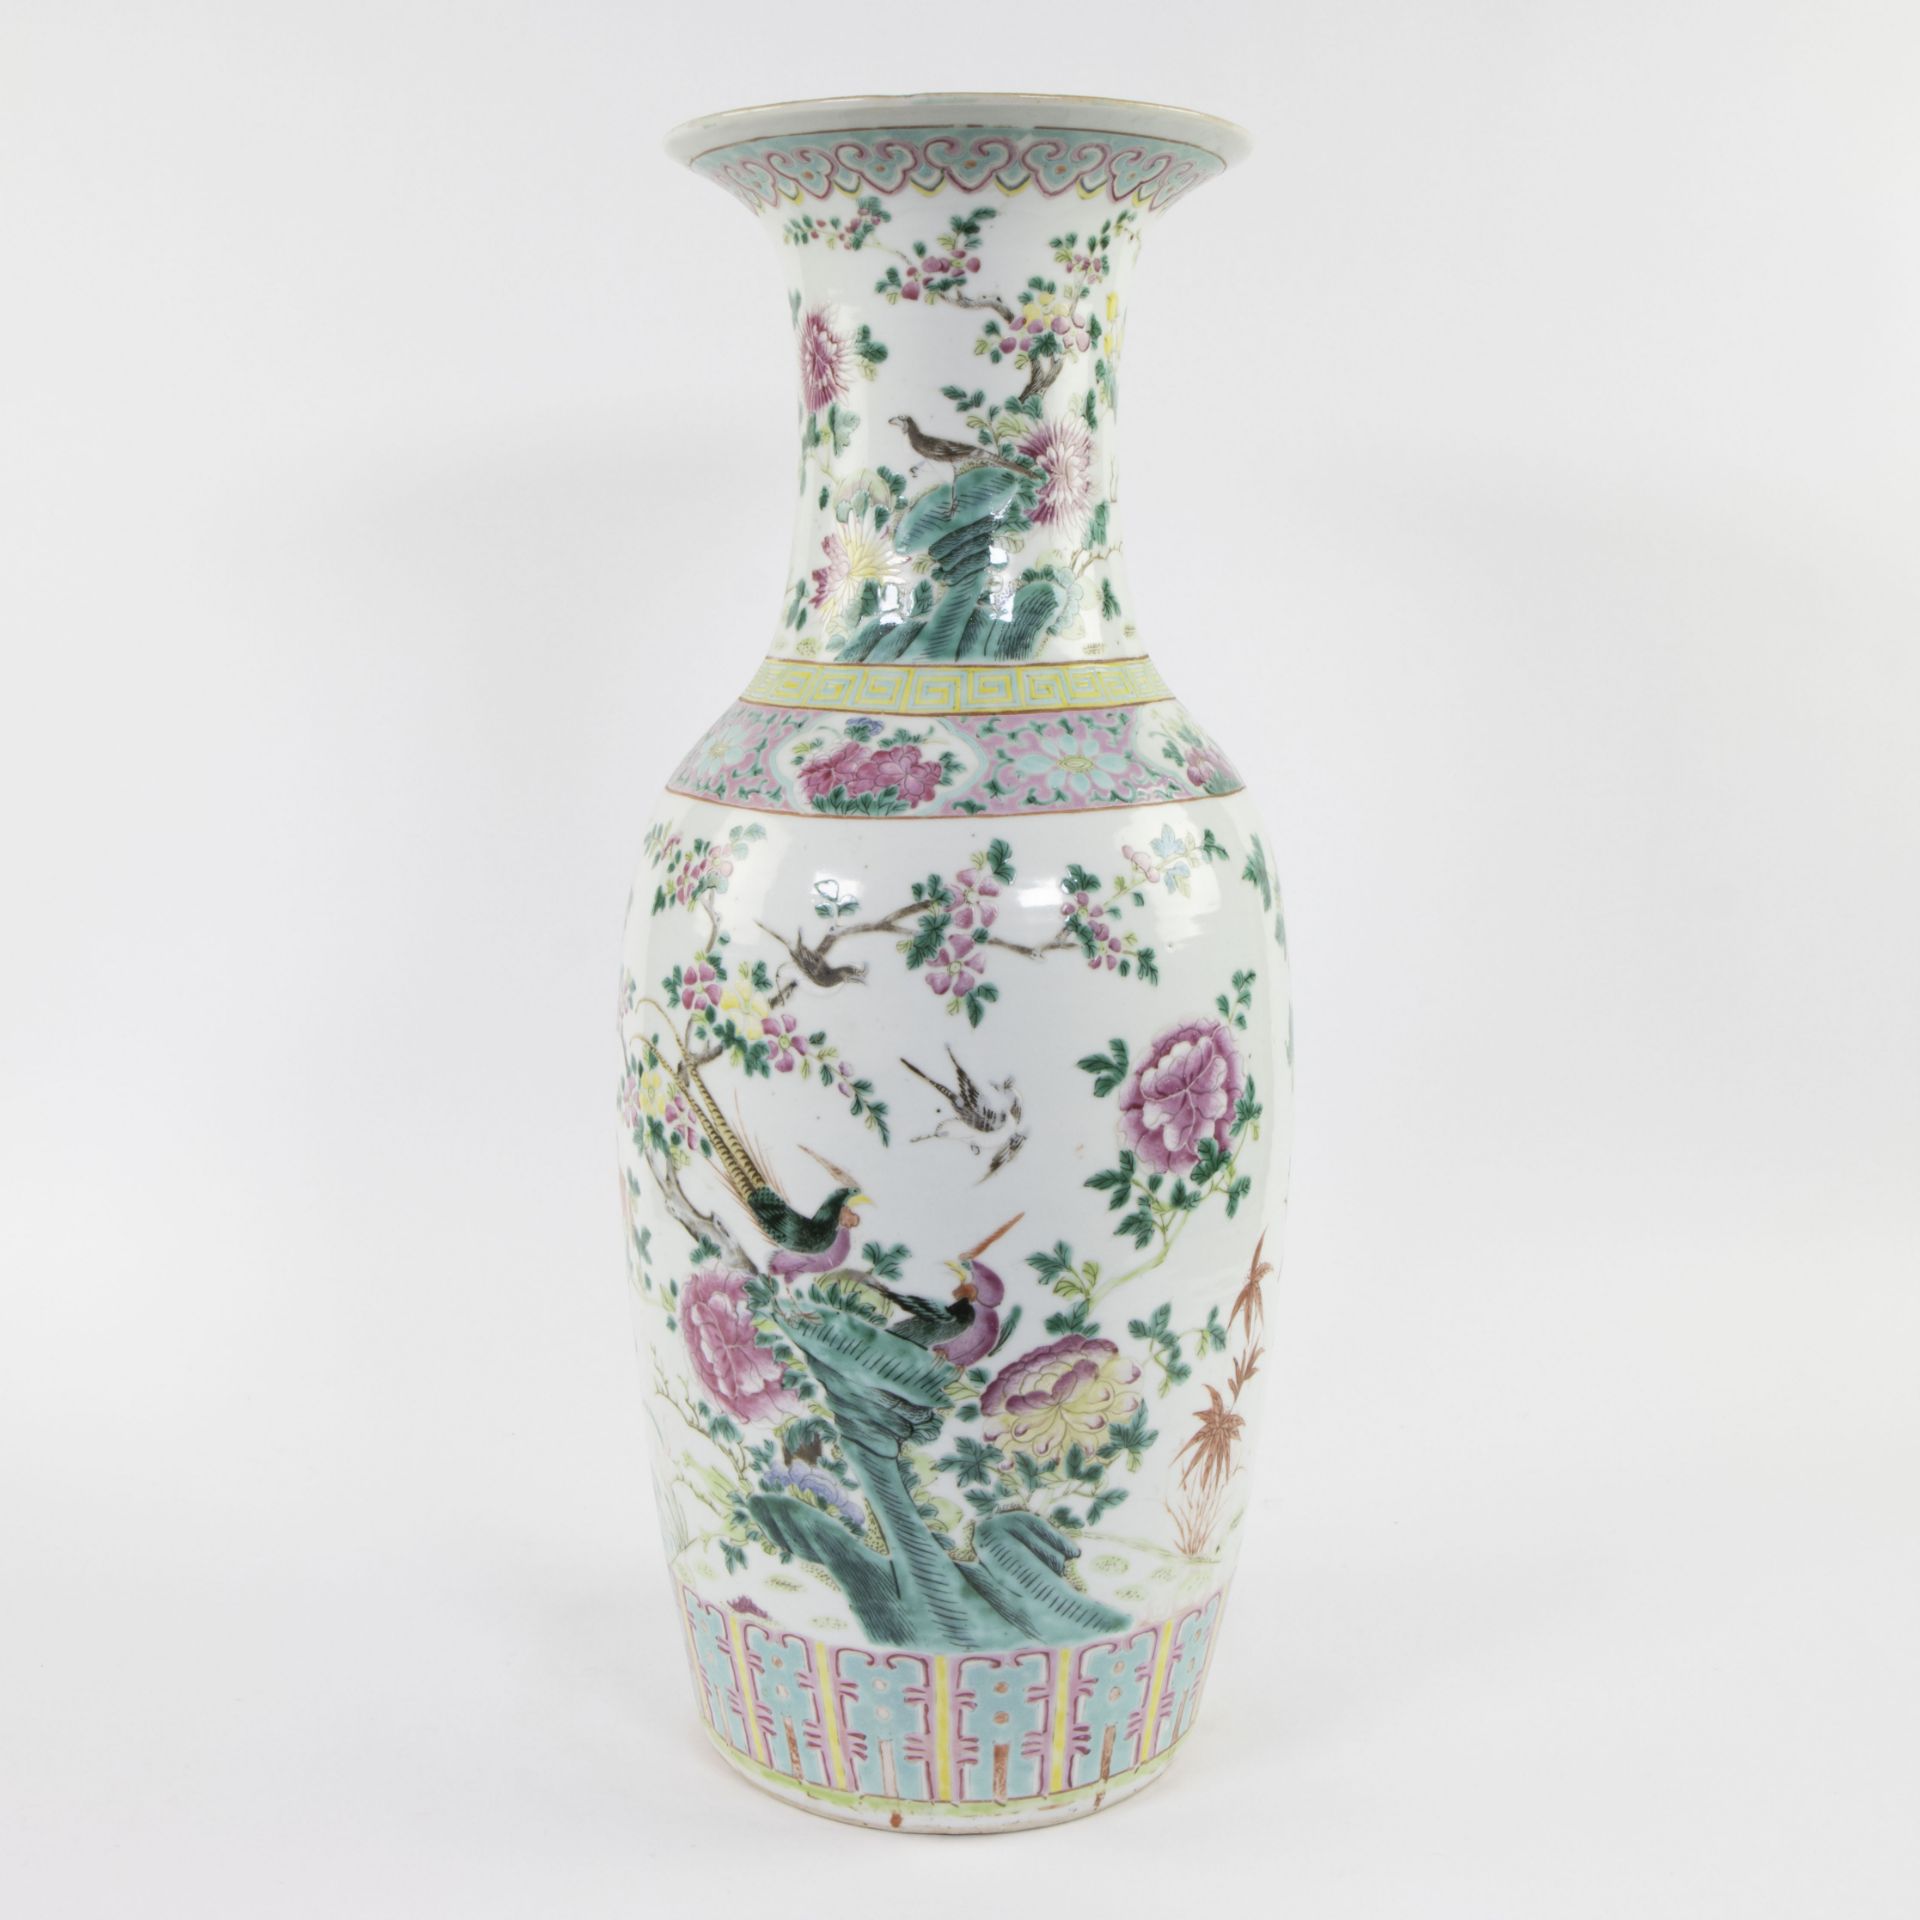 Cinese vase famille rose 19th century - Image 3 of 6